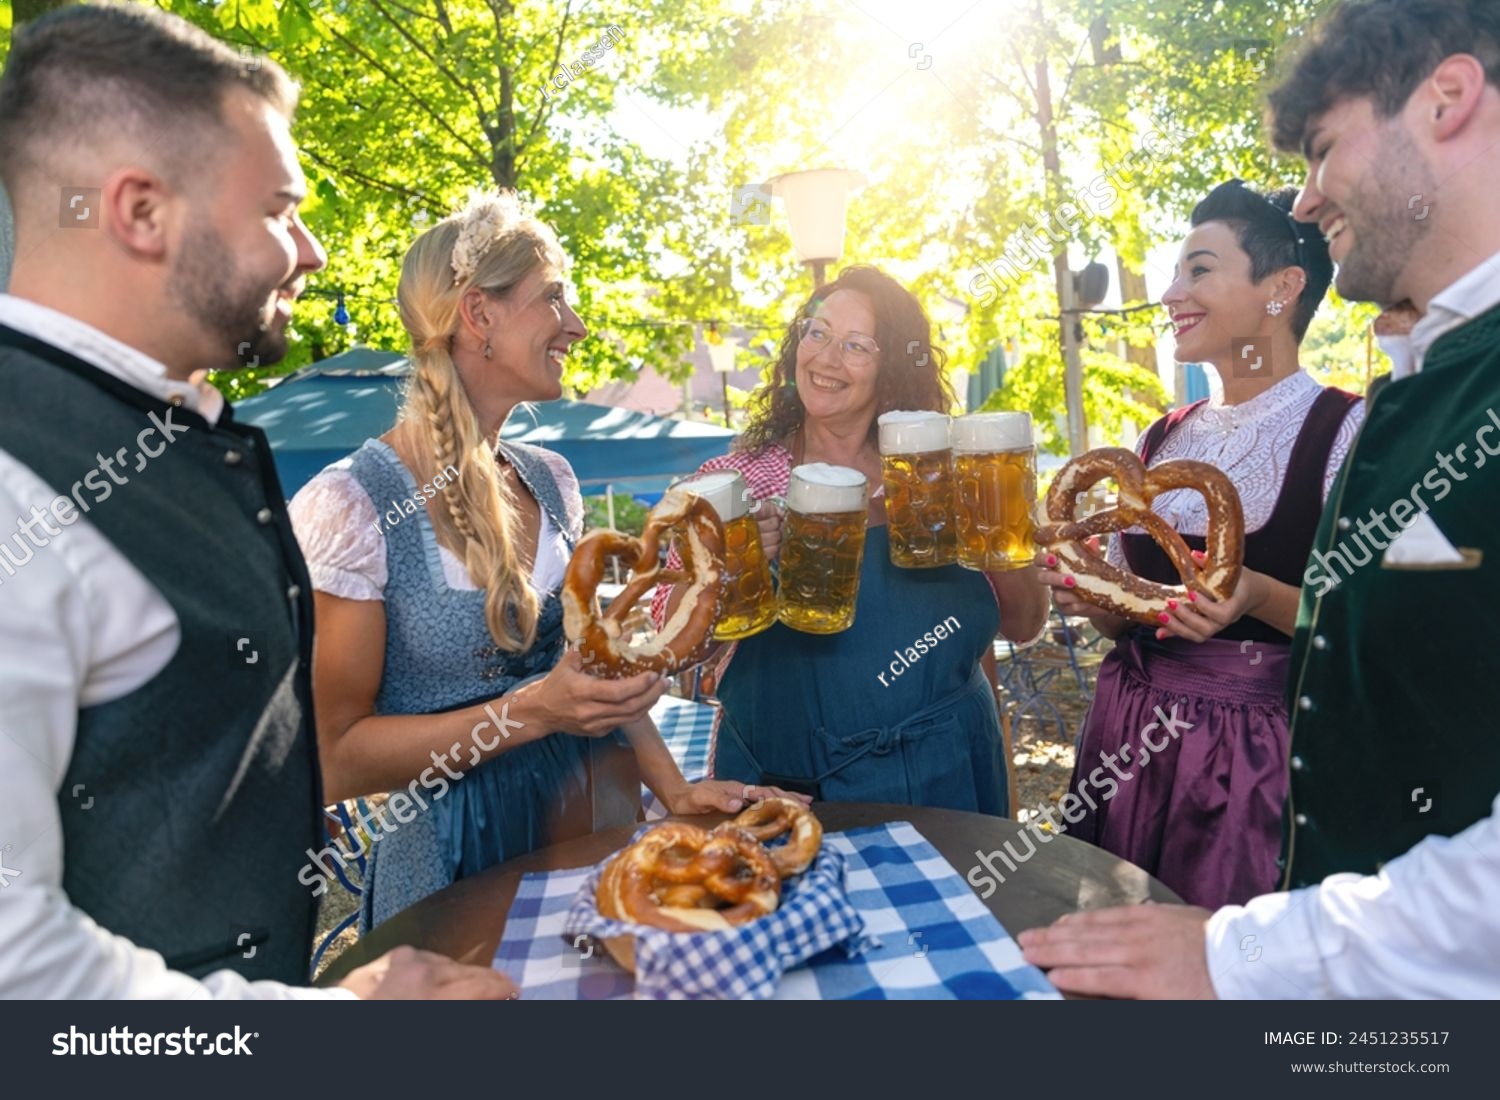 Waitress serving beer to a group of happy friends in traditional tracht at oktoberfest or beer garden in germany #2451235517